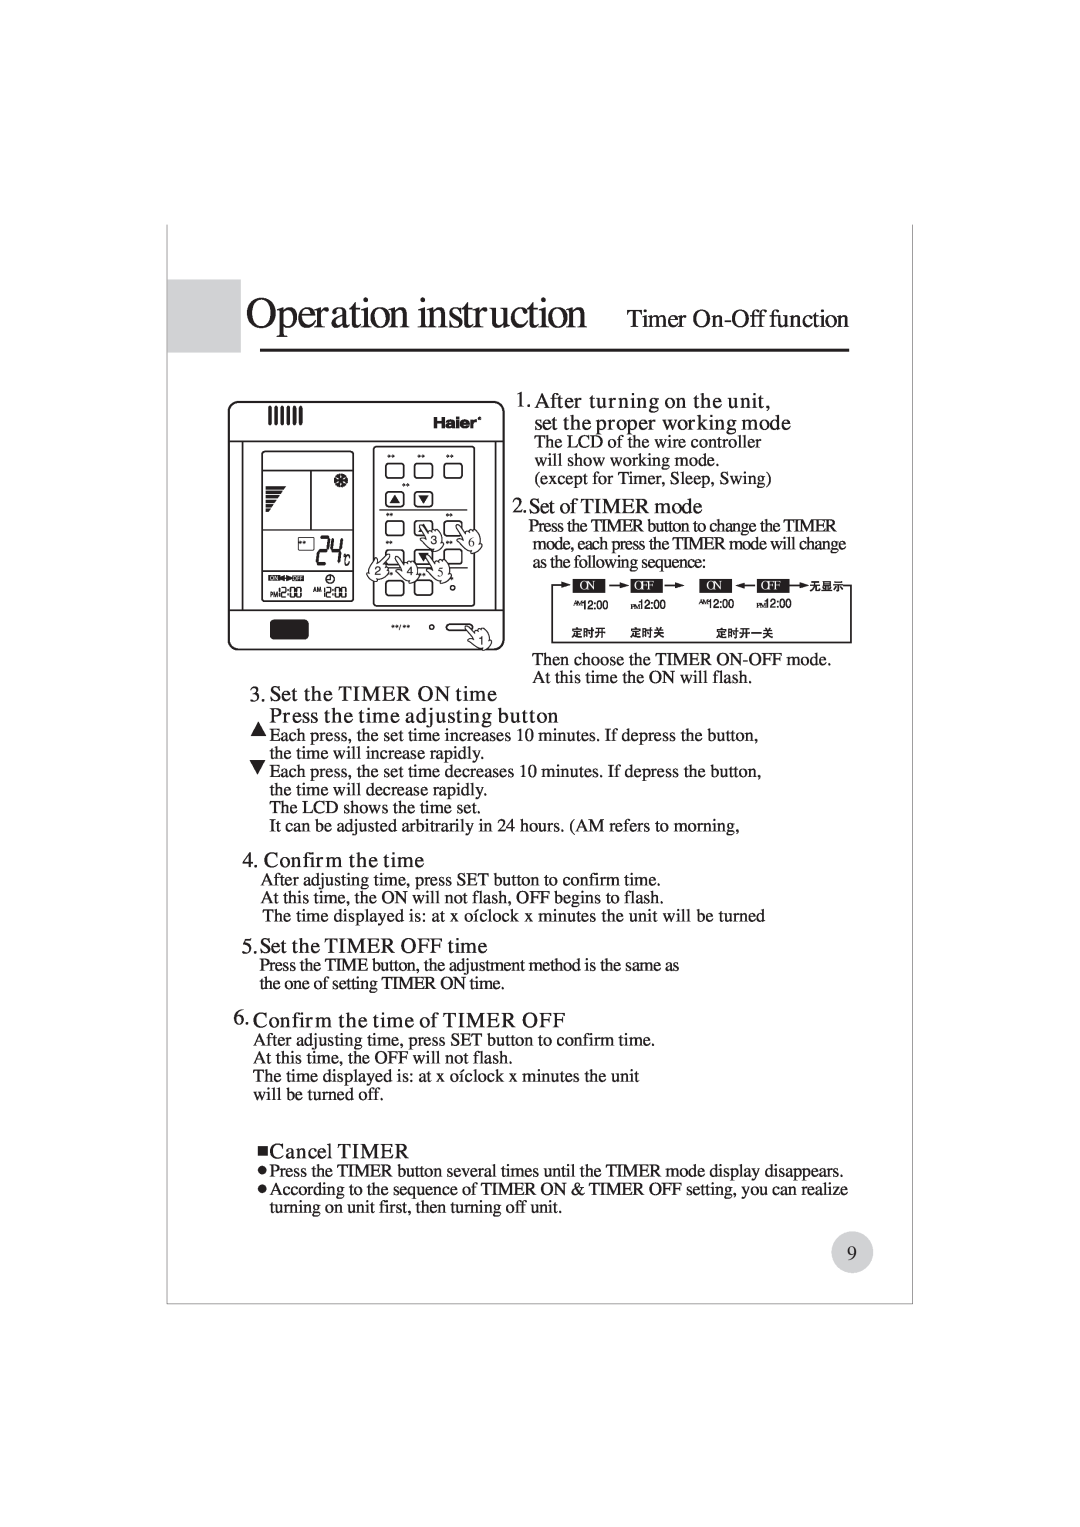 Haier AE122BCAAA (H2EM-18H03) Operation instruction Timer On-Offfunction, After turning on the unit, Set of TIMER mode 